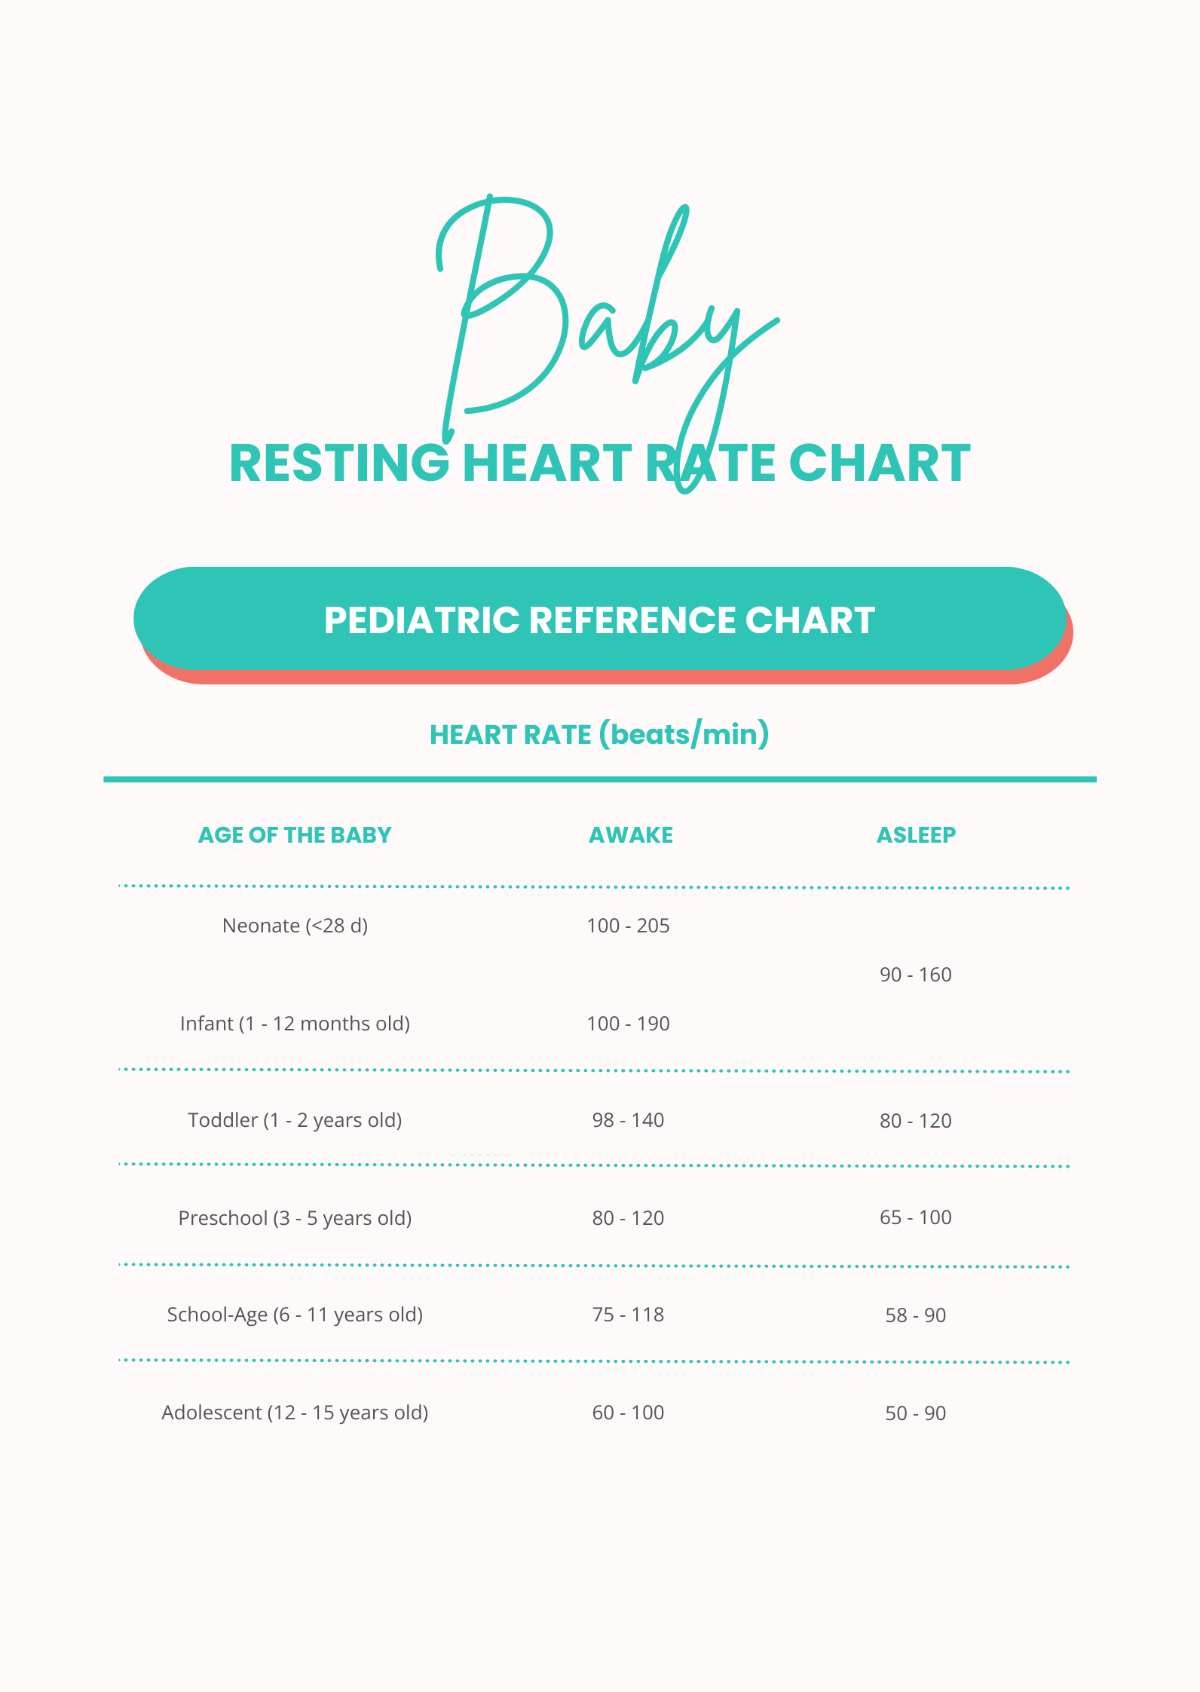 Baby Resting Heart Rate Chart Template